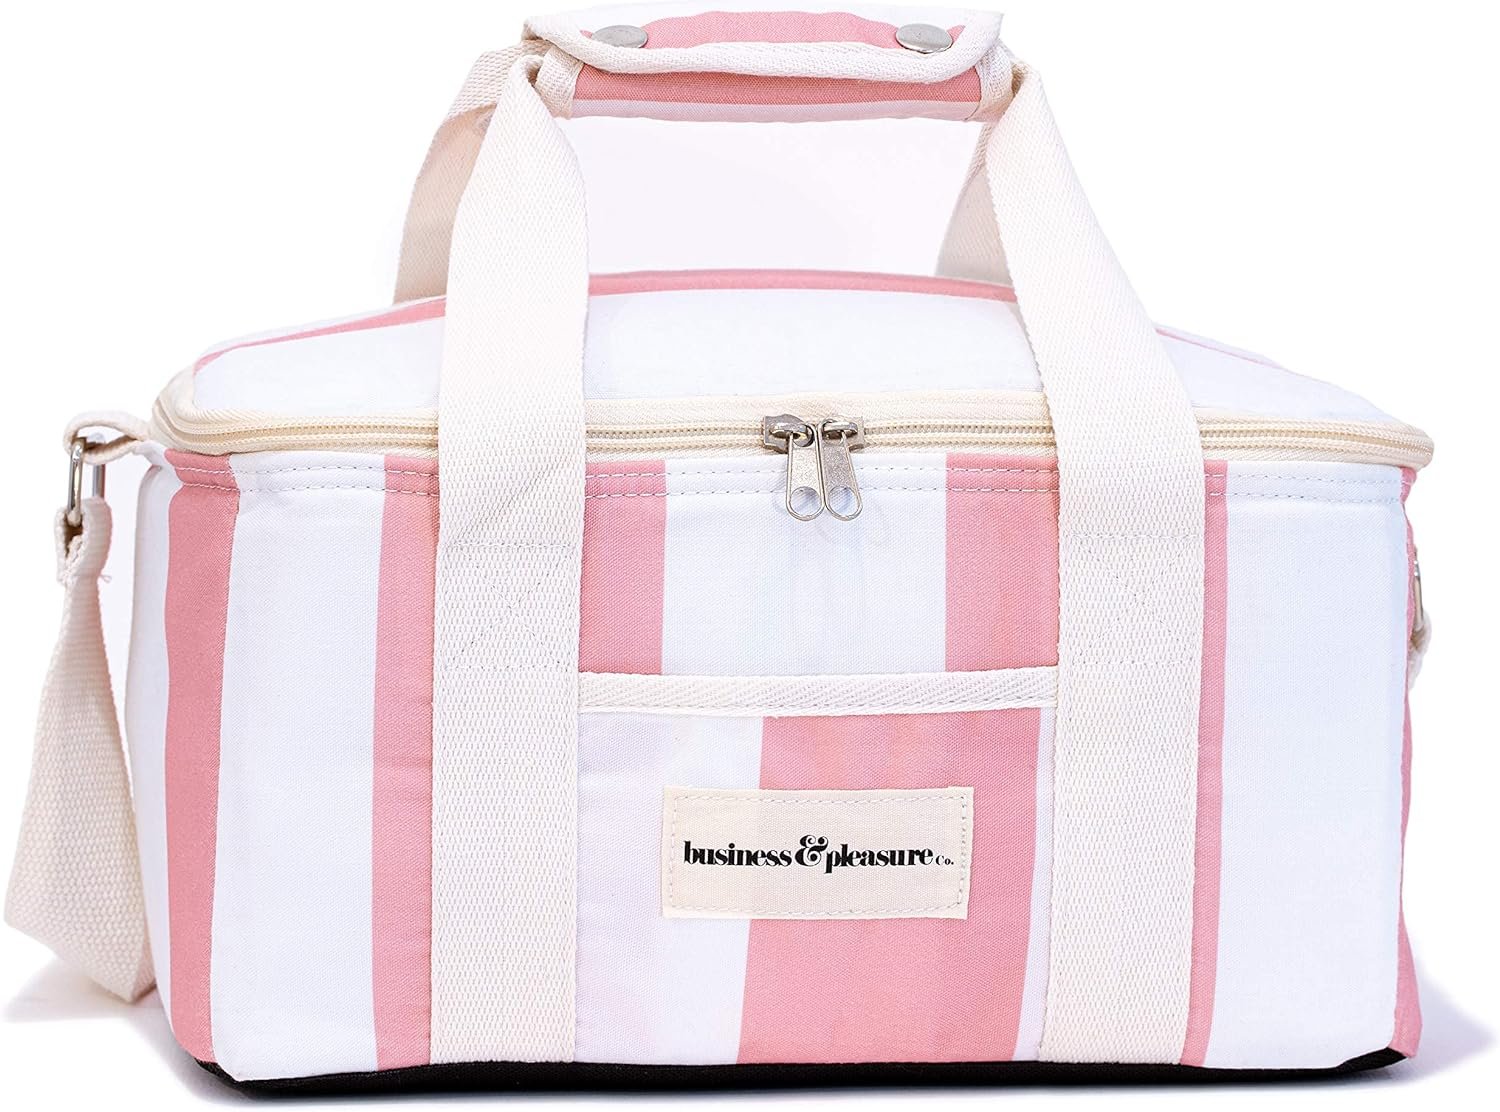 Business & Pleasure Co. Holiday Cooler Bag Review